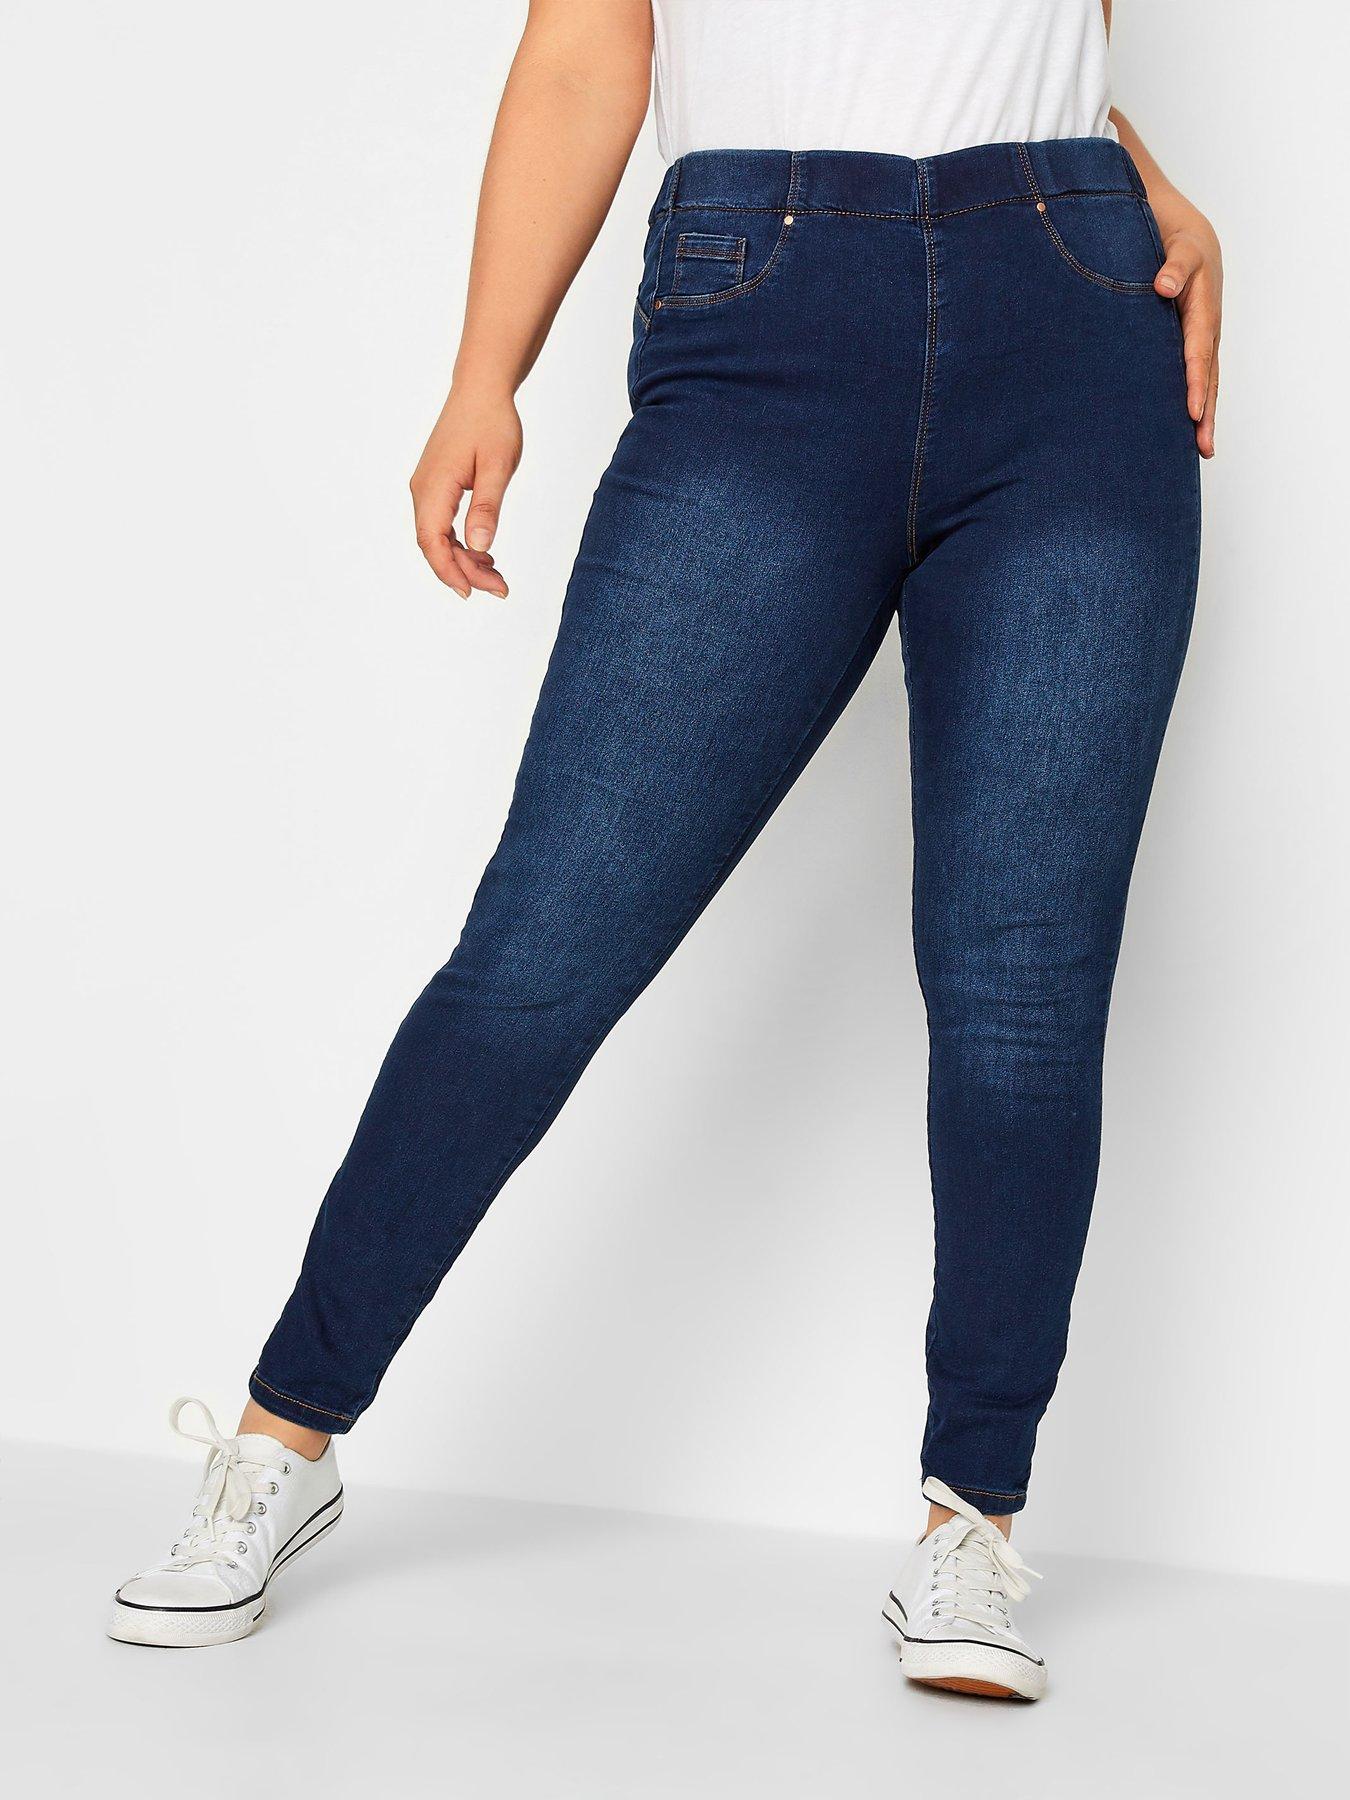  Yours YOURS FOR GOOD Bum Shaper Jeggings - Indigo